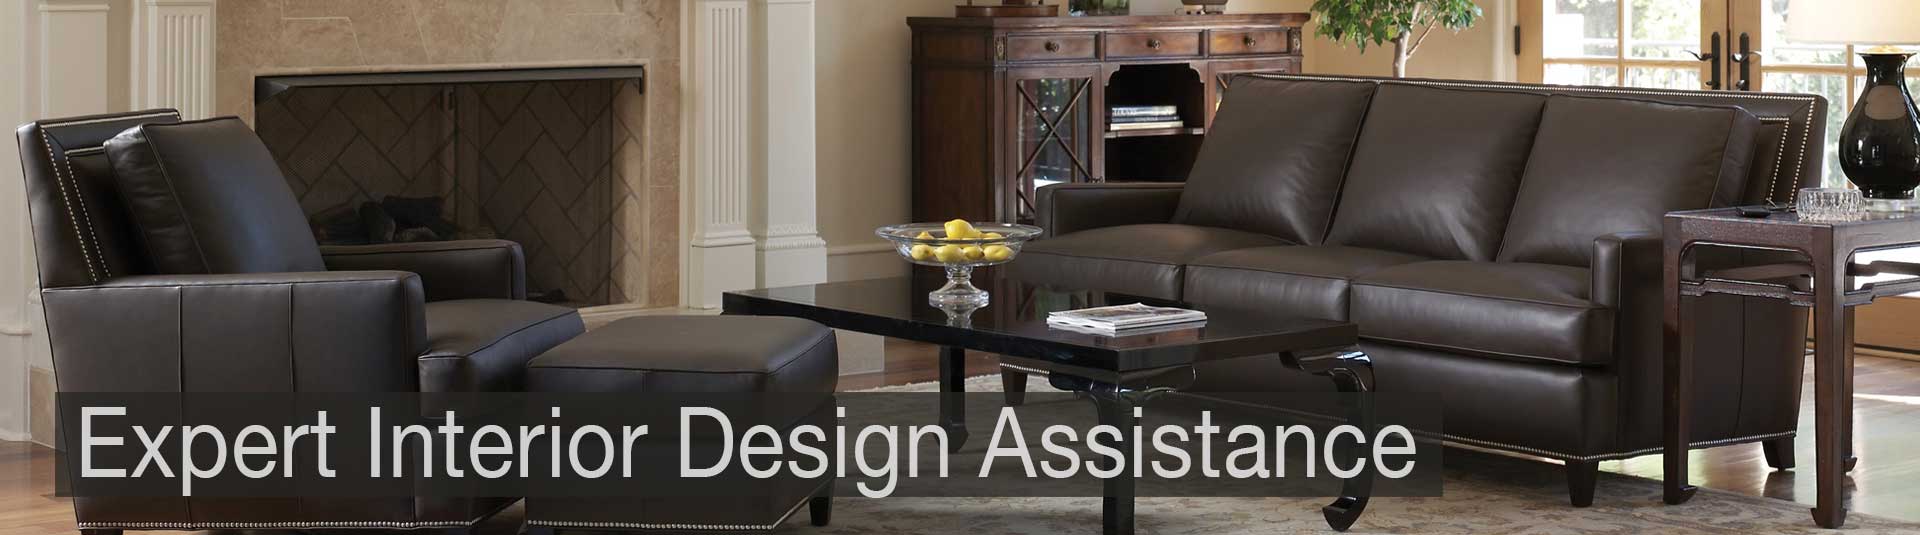 Two entire floors of just furniture, low price guarantee and expert interior design assistance at Benson Stone Company